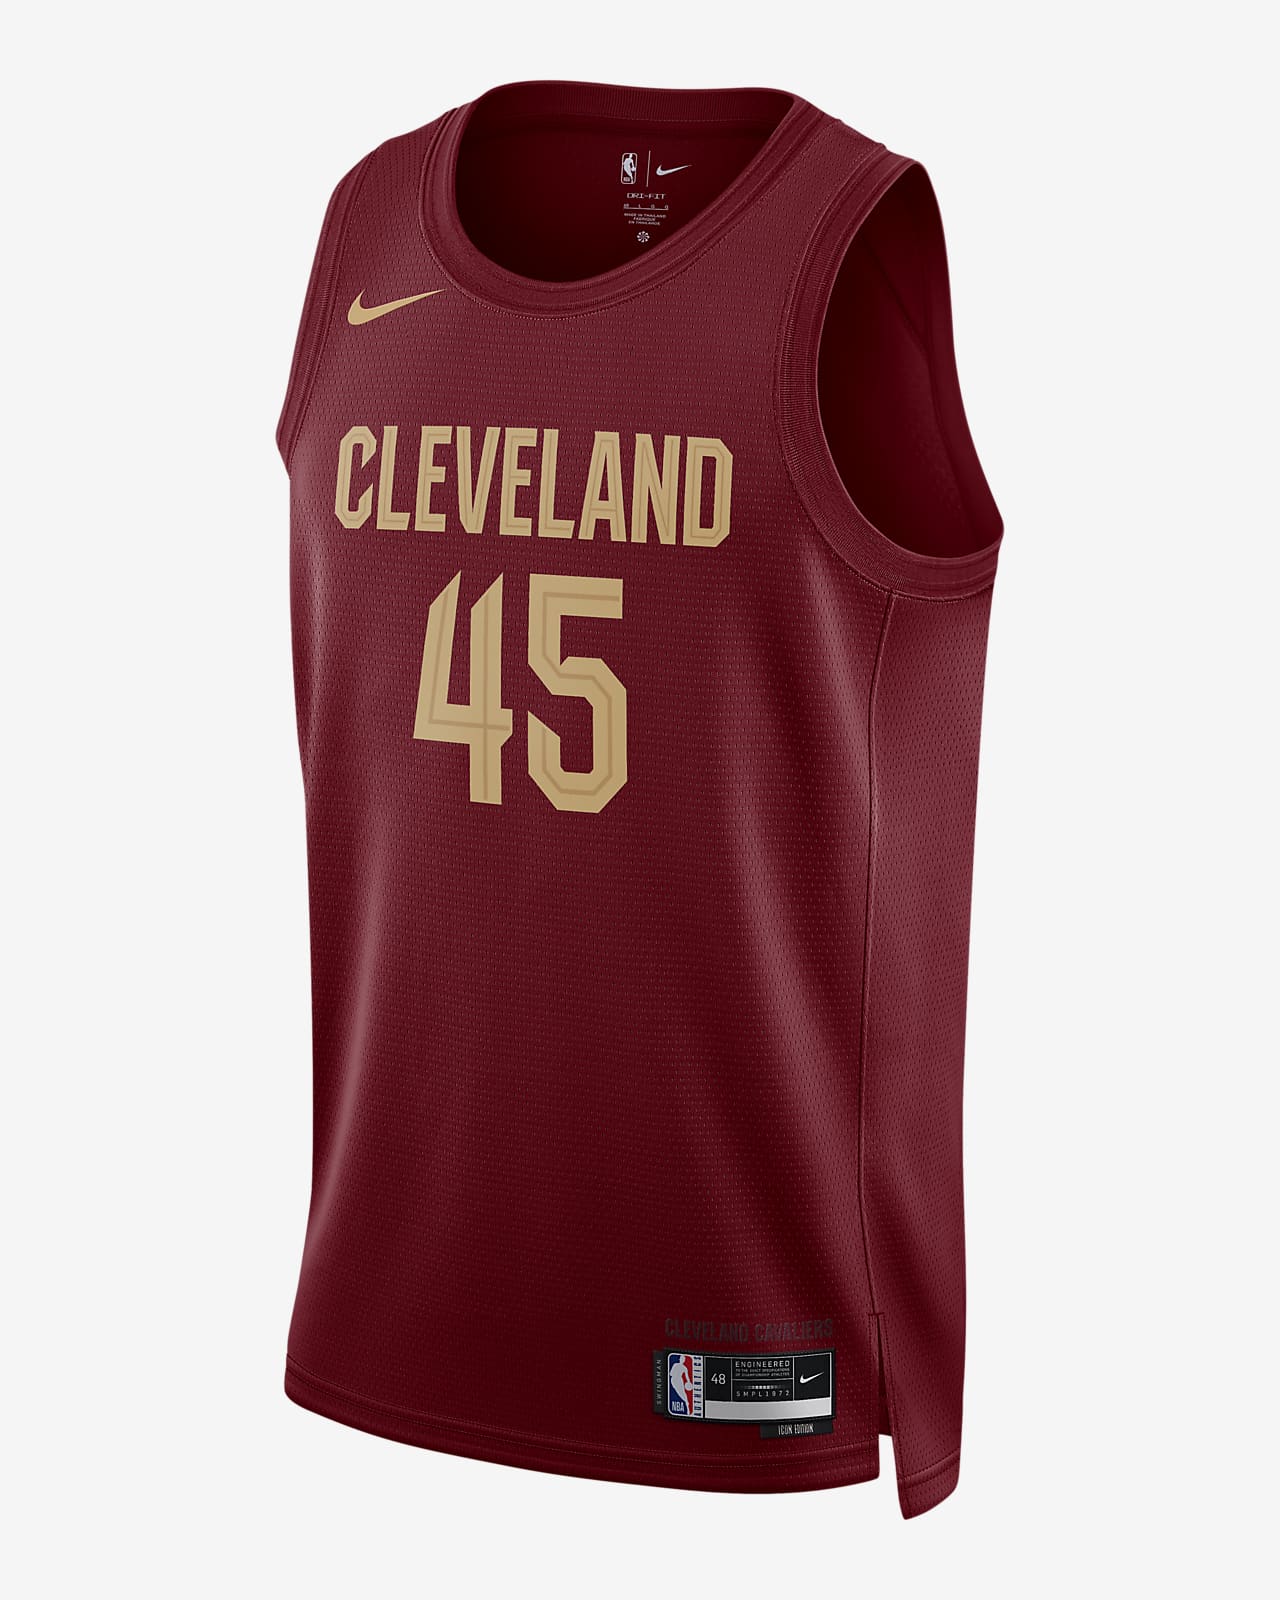 Maillot Nike Dri-FIT NBA Swingman Cleveland Cavaliers Icon Edition 2022/23 pour homme